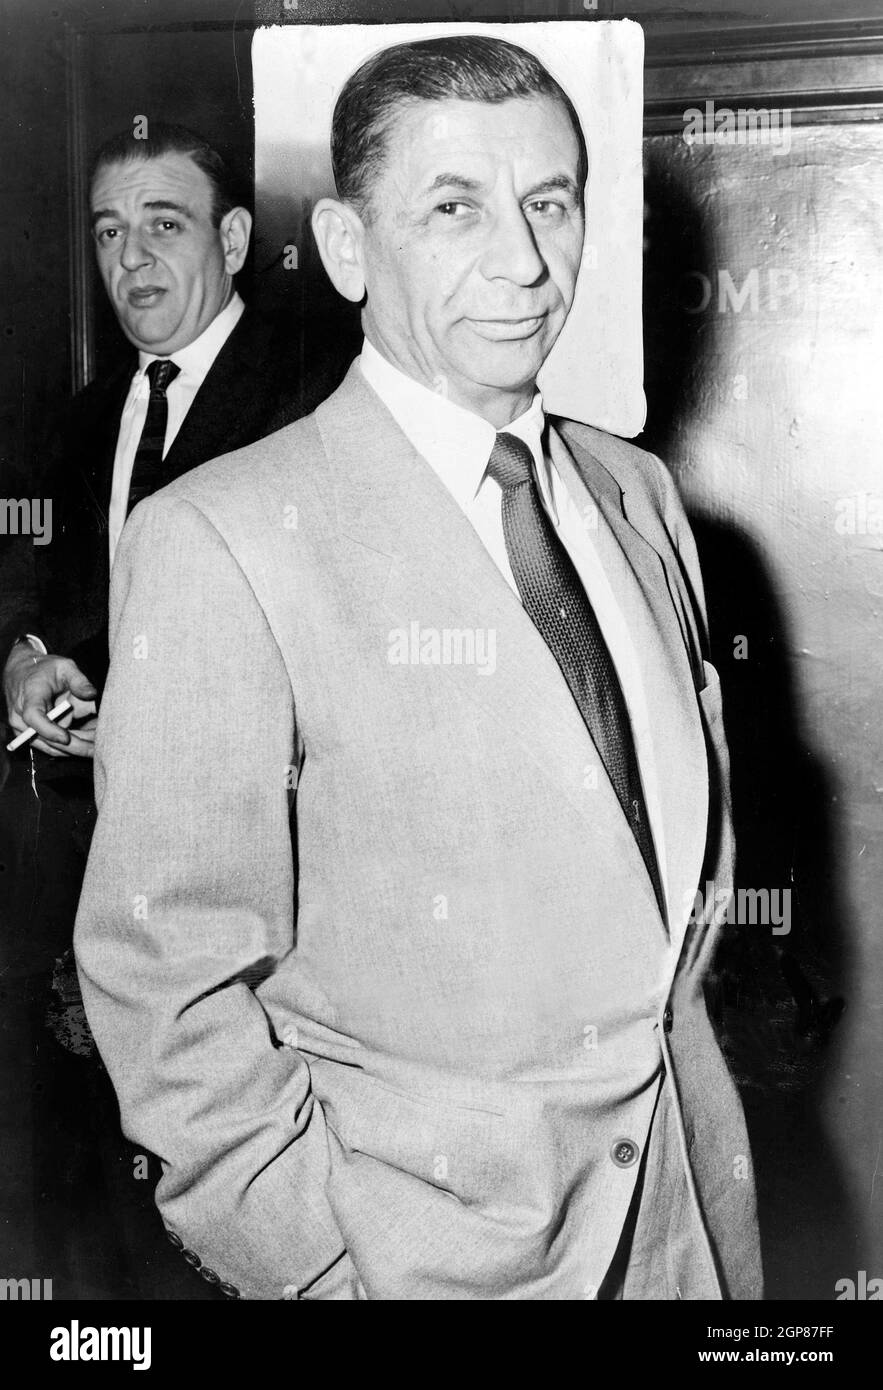 Meyer Lansky, (1902 – 1983), known as the 'Mob's Accountant', was an American organized crime figure of Polish birth who, along with his associate Charles 'Lucky' Luciano, was instrumental in the development of the National Crime Syndicate in the United States. Stock Photo